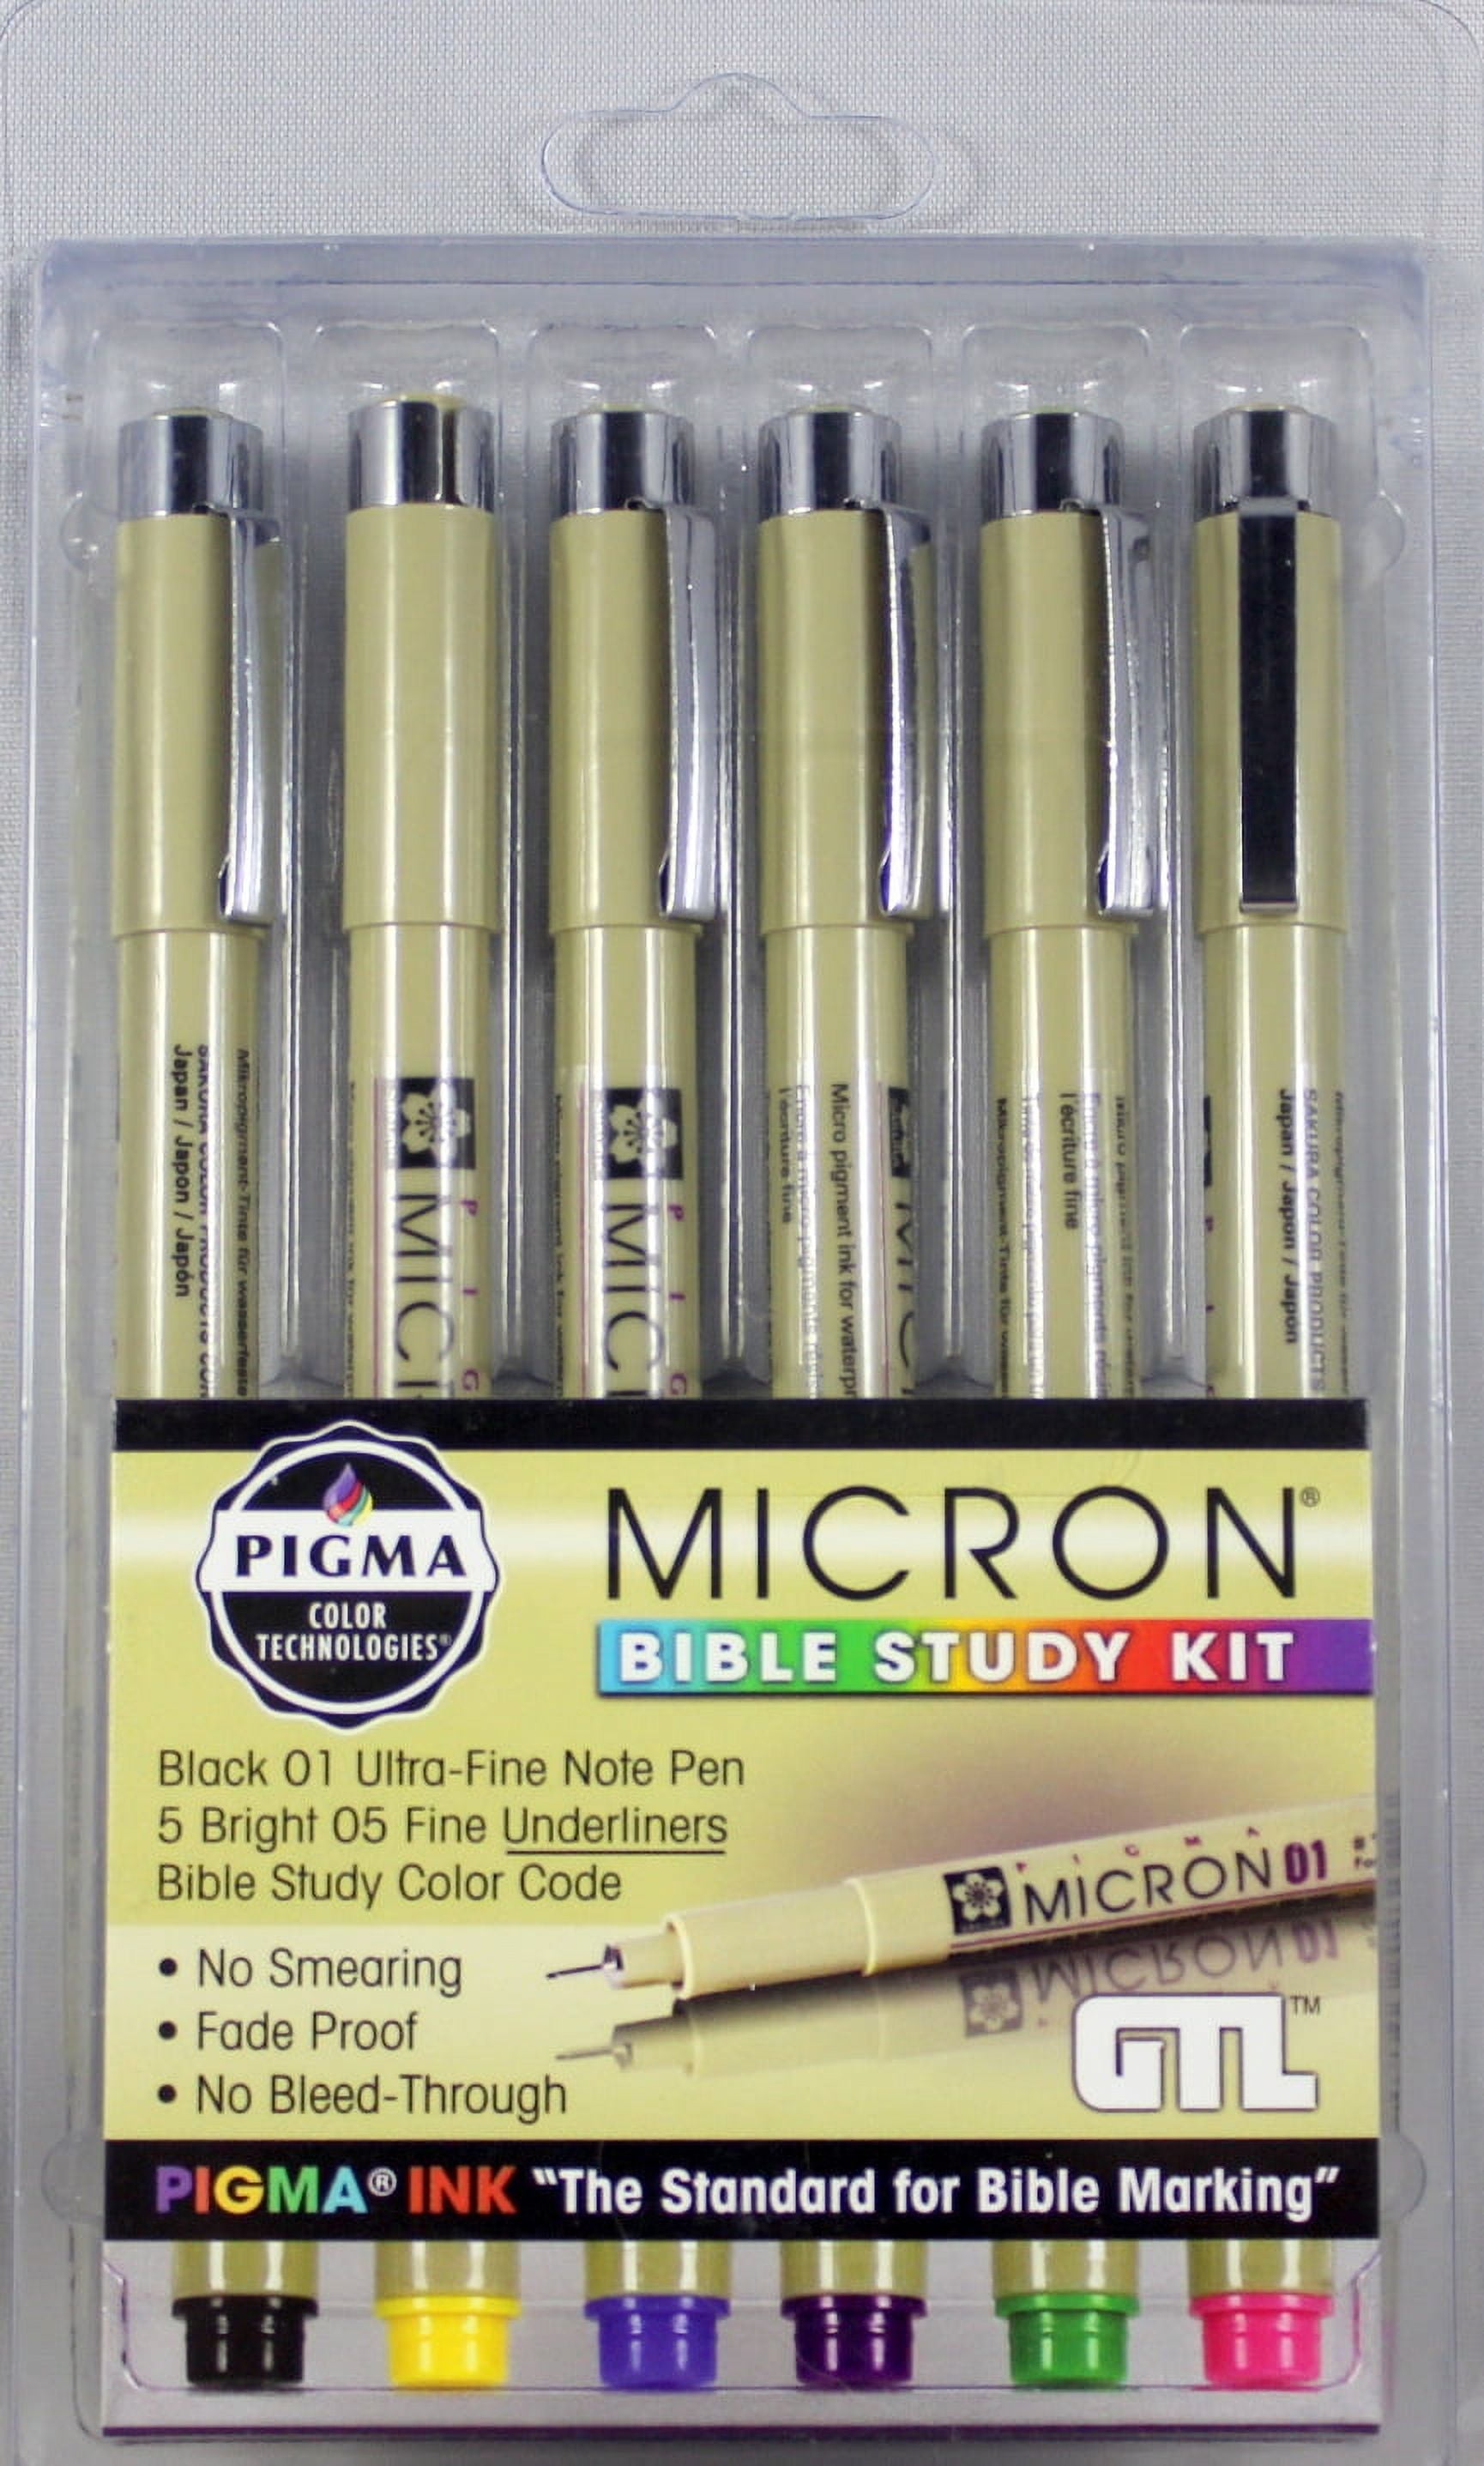  G.T. Luscombe Company, Inc. Pigma Micron 005 Ultra Fine Point  Bible Note Pen Kit, No Bleed Pigmented Ink, Bible Safe, No Smearing or  Fading